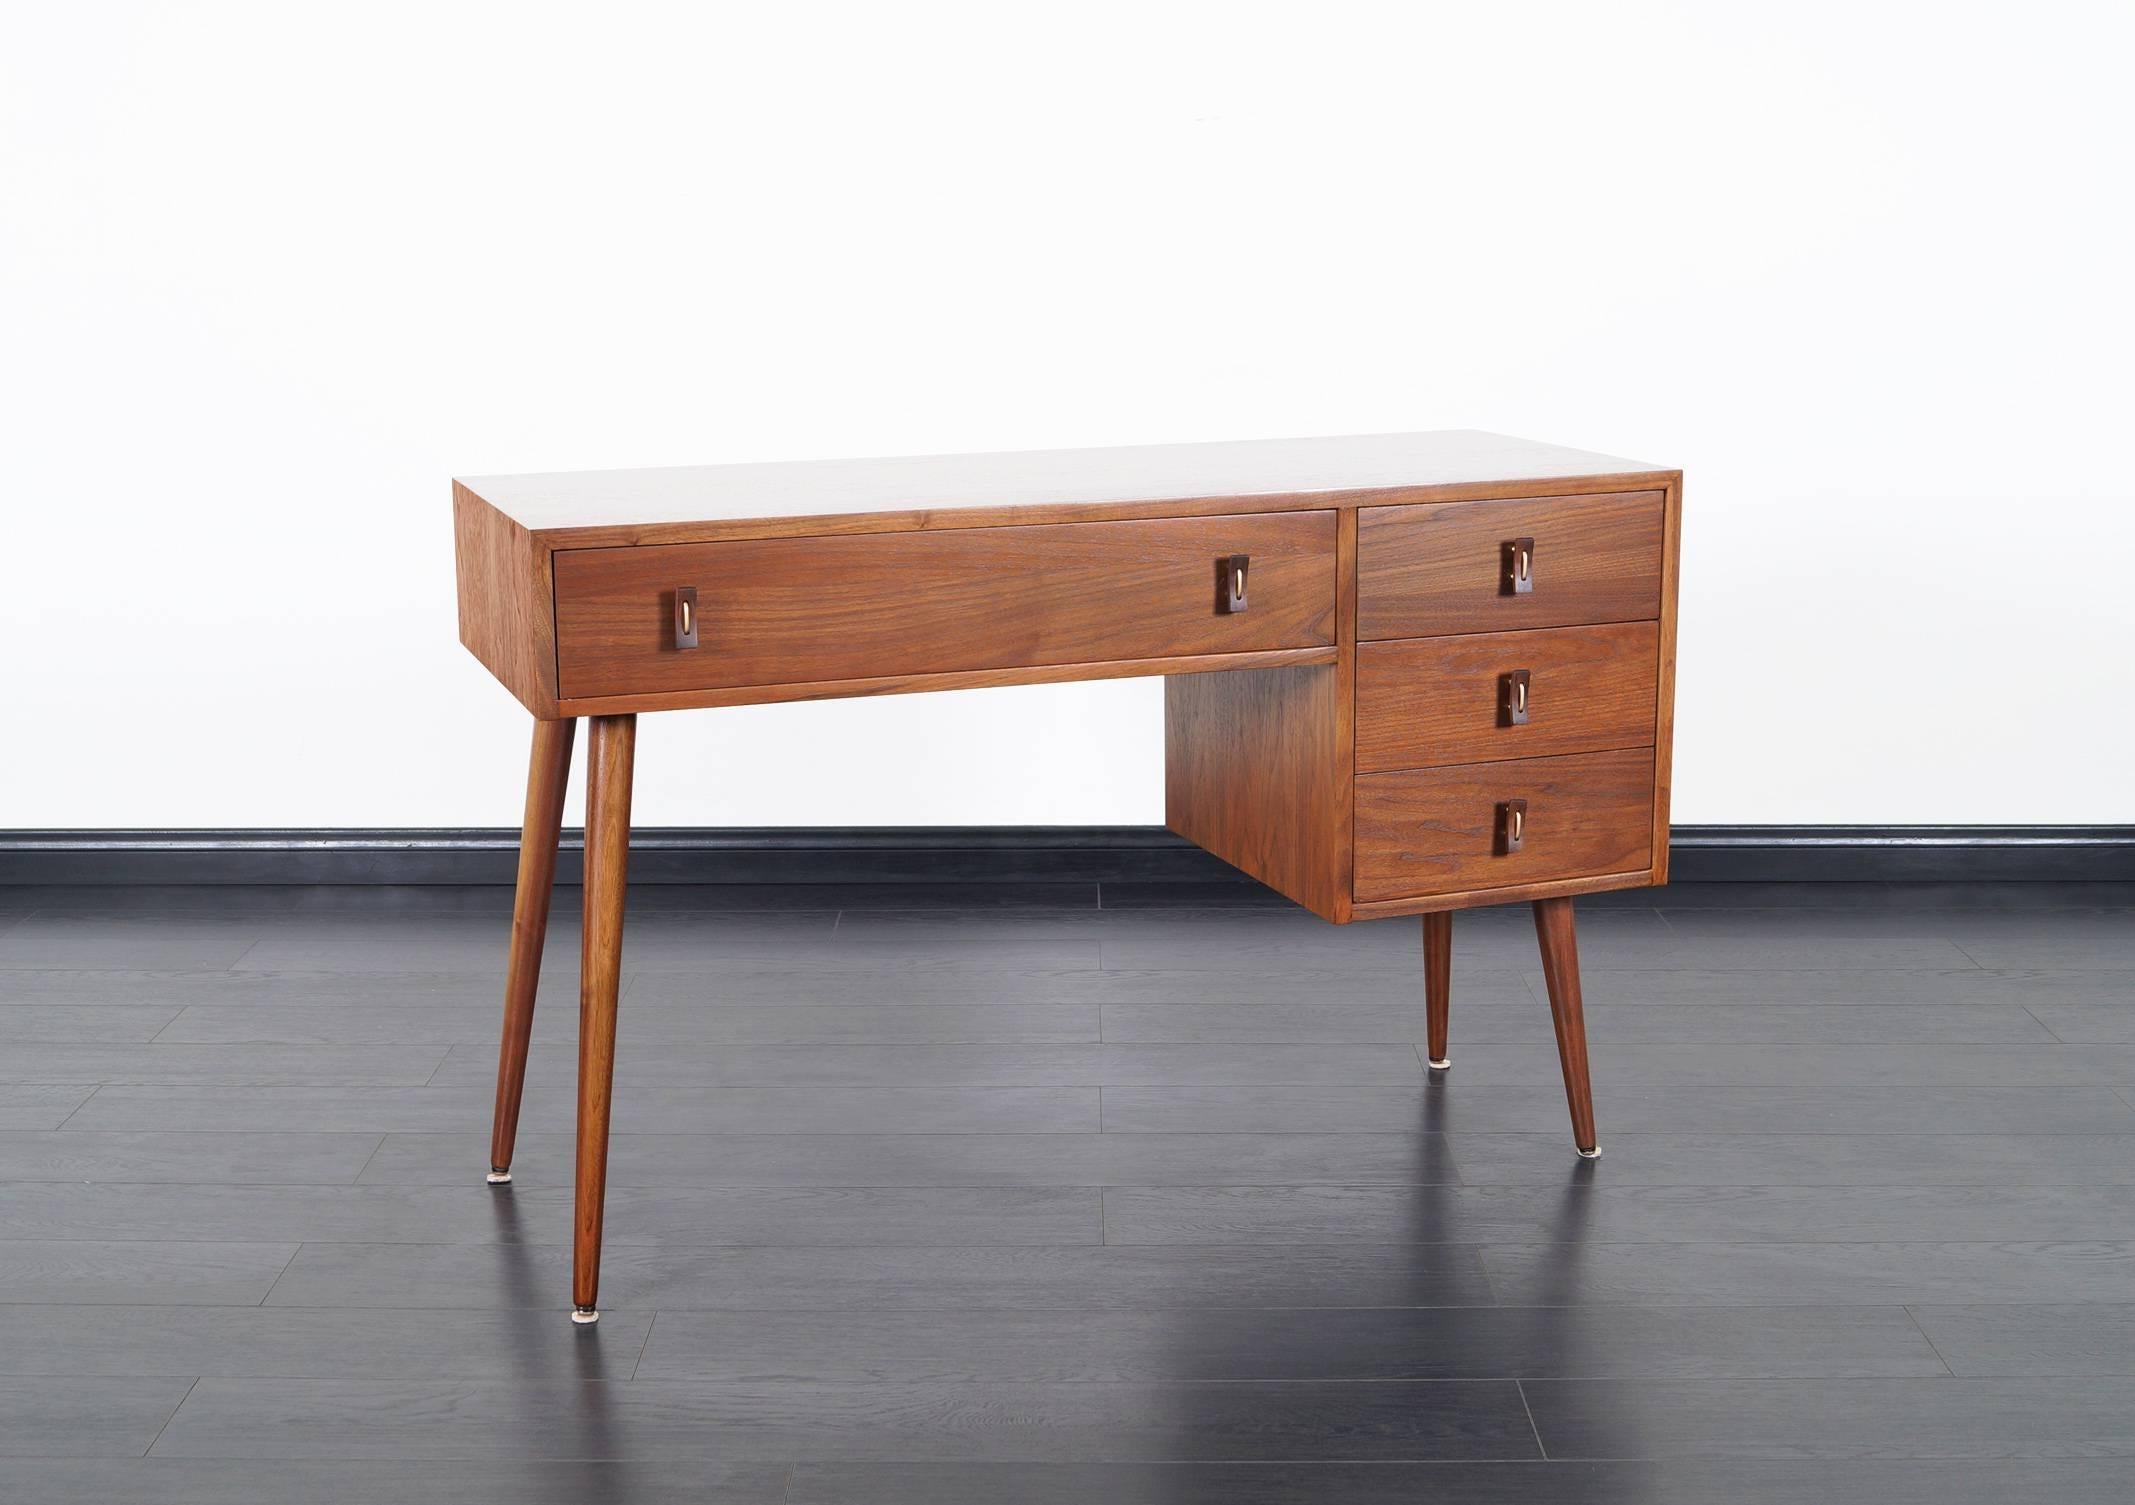 Vintage walnut desk designed by Stanley Young for Glenn of California. Features two drawers and one file drawer with sculpted handles.